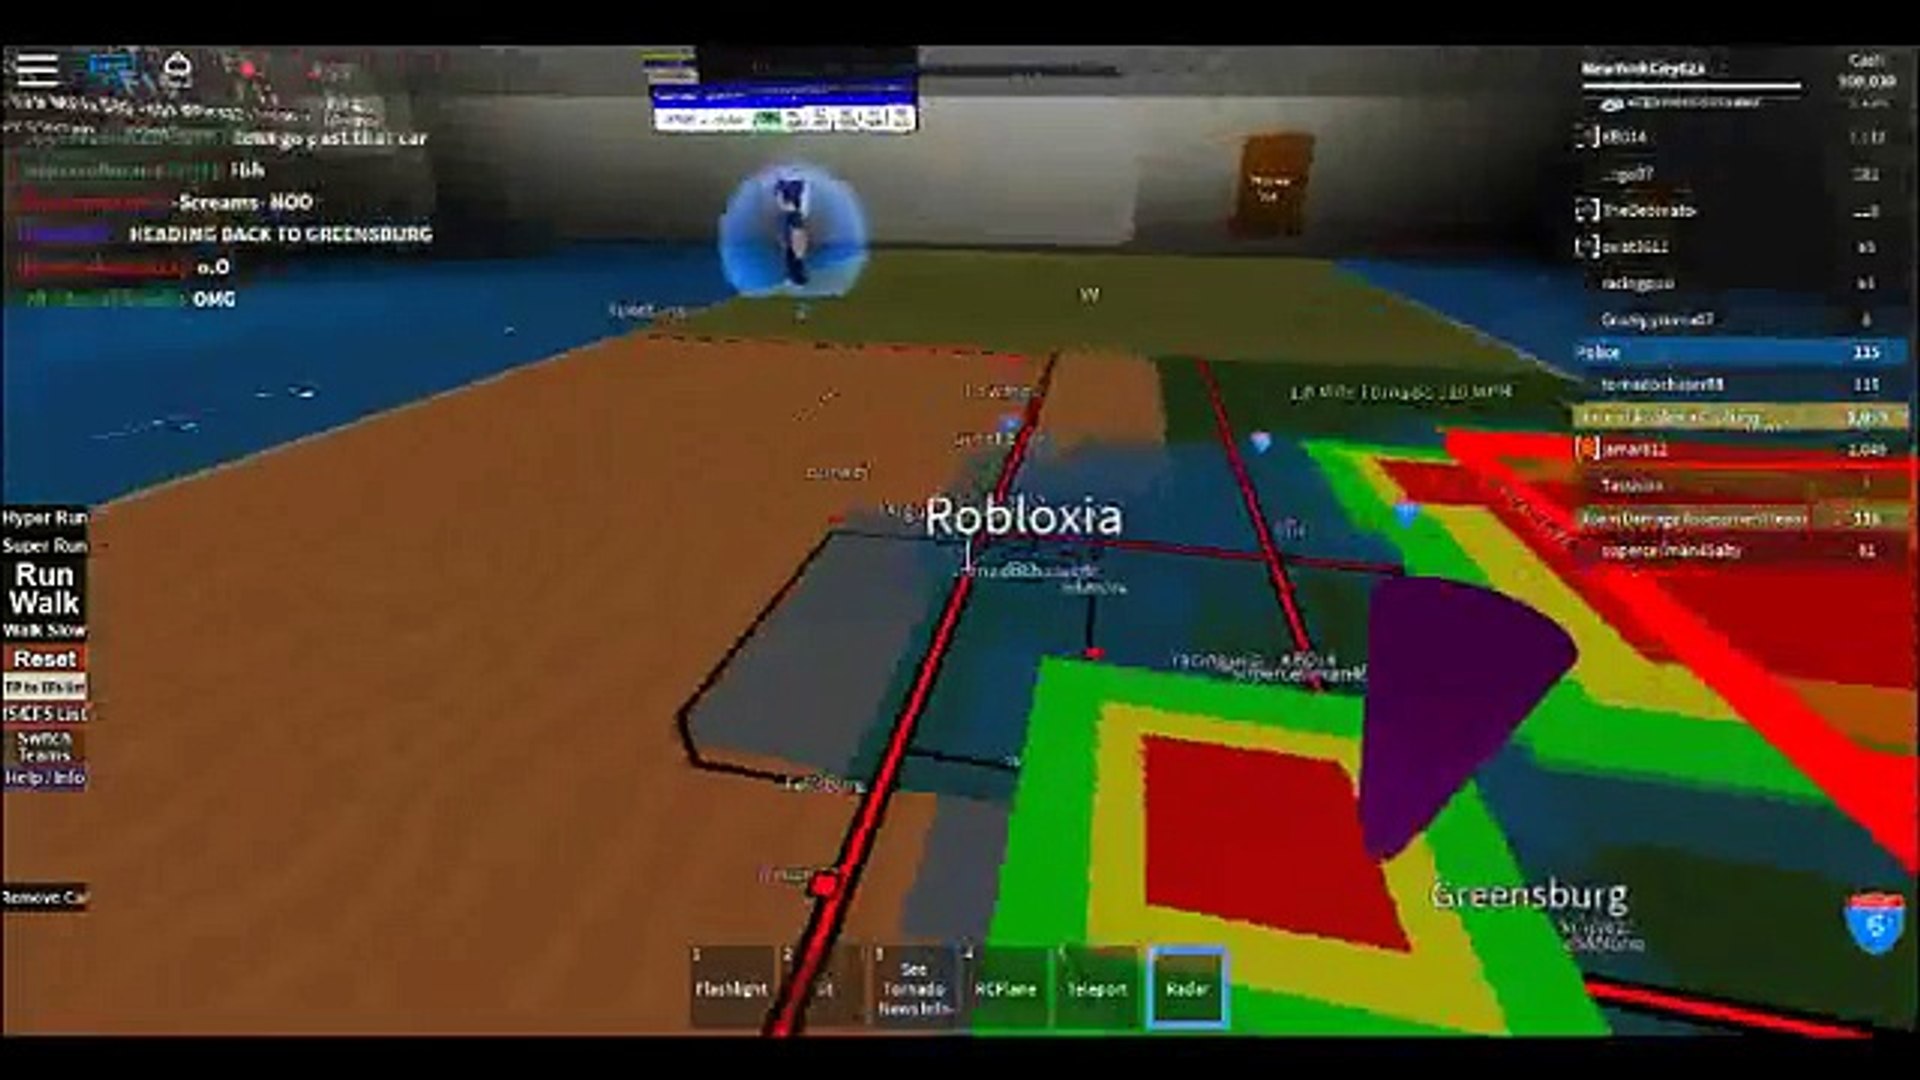 Roblox Storm Chasers Ep27 Massive 310 Mph Ef5 Hits Greensburg Epic Rc Plane Footage Video Dailymotion - roblox storm chasers